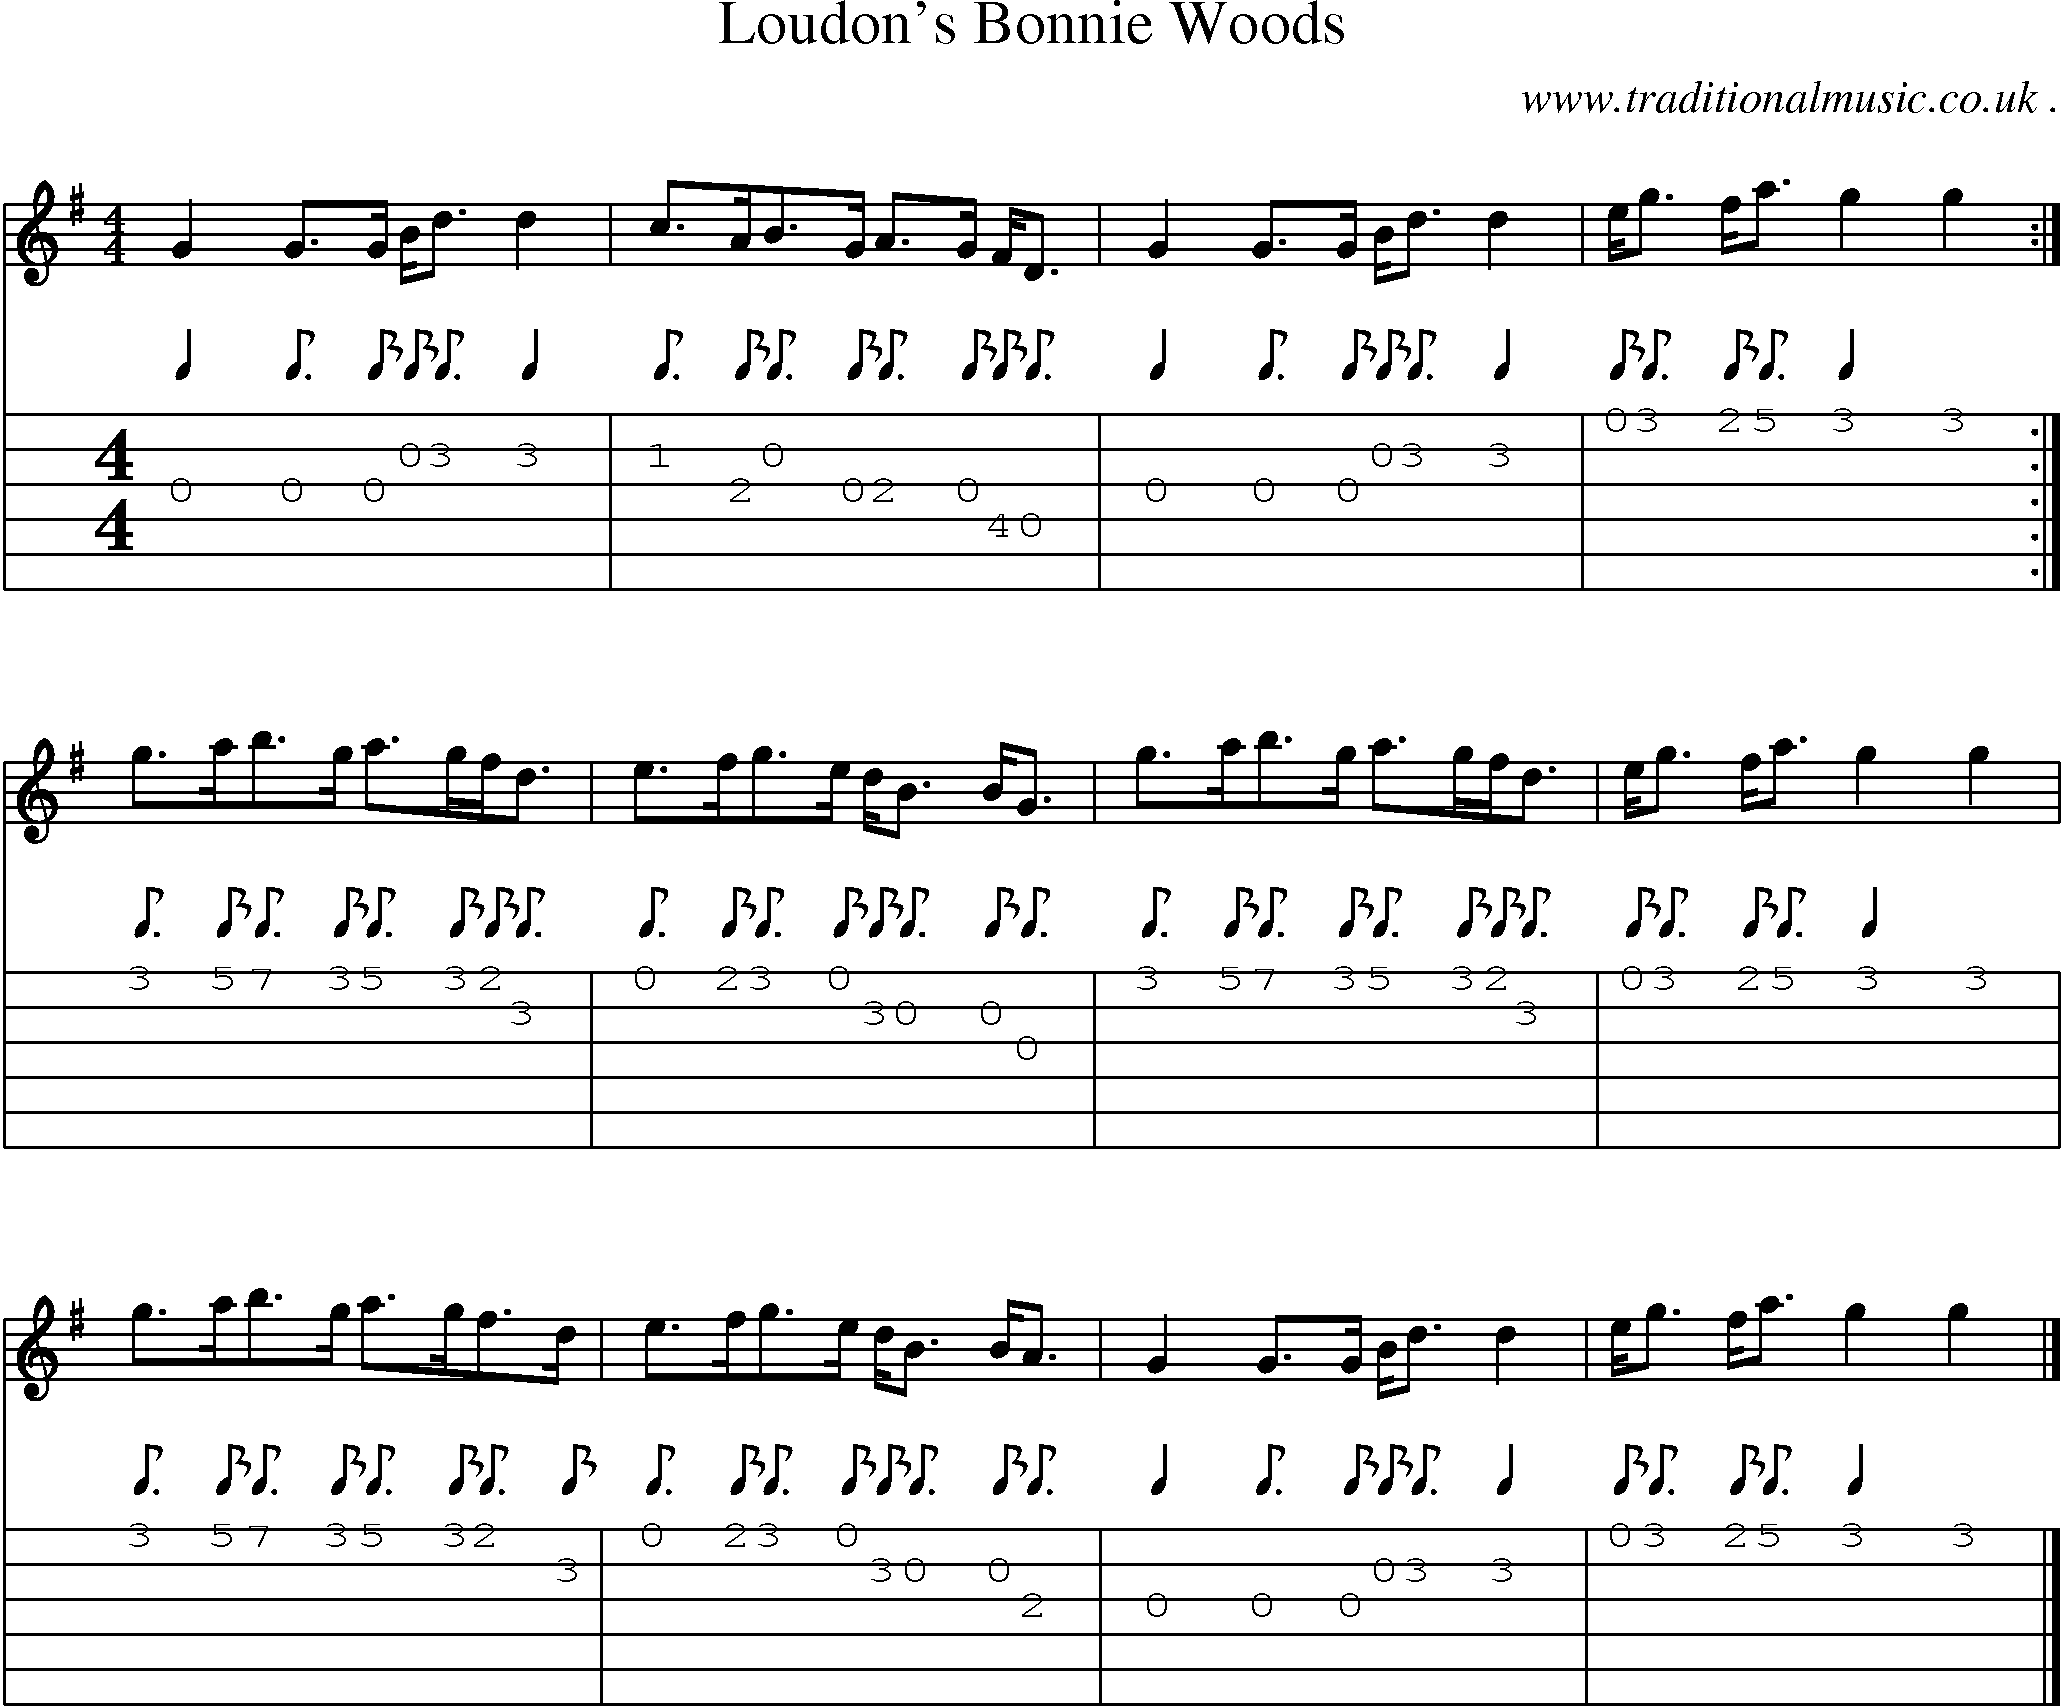 Sheet-music  score, Chords and Guitar Tabs for Loudons Bonnie Woods